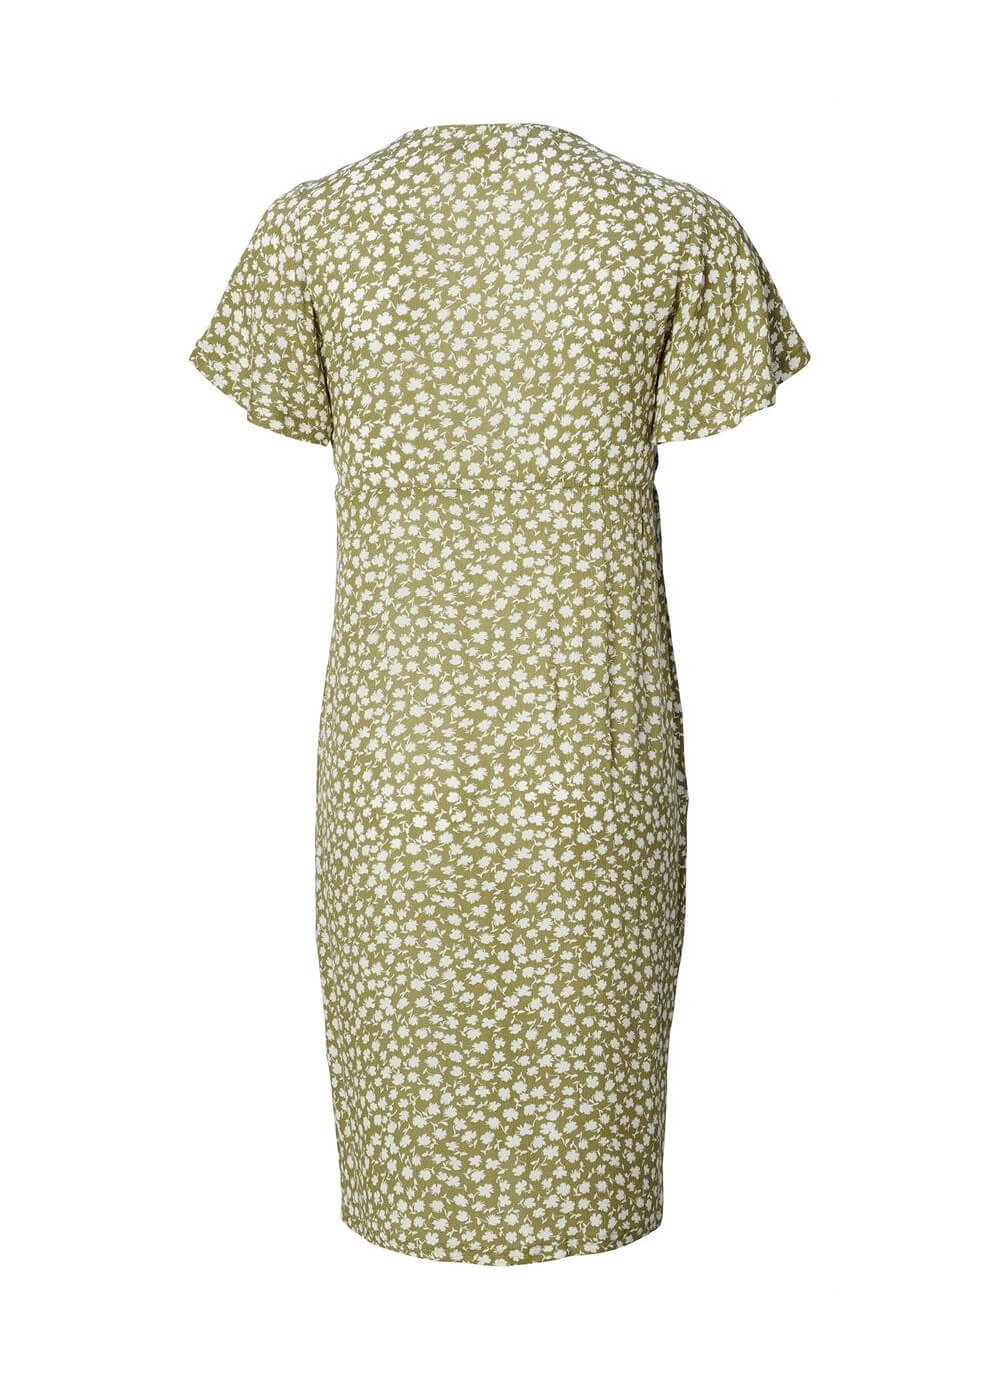 Supermom - Olive Floral Maternity Nursing Wrap Dress | Queen Bee